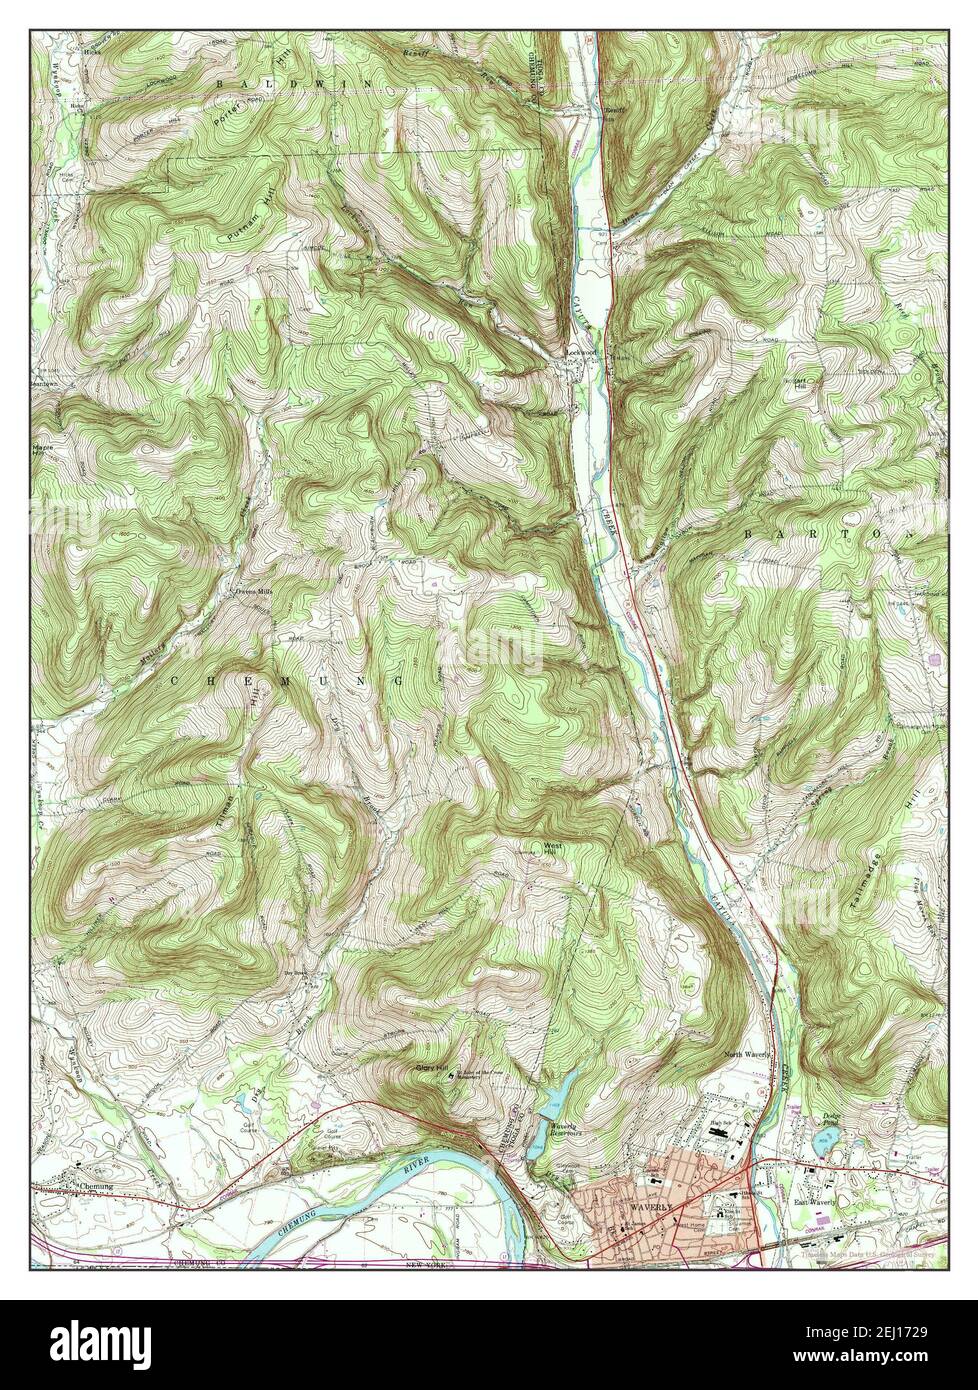 Waverly, New York, map 1969, 1:24000, United States of America by Timeless Maps, data U.S. Geological Survey Stock Photo